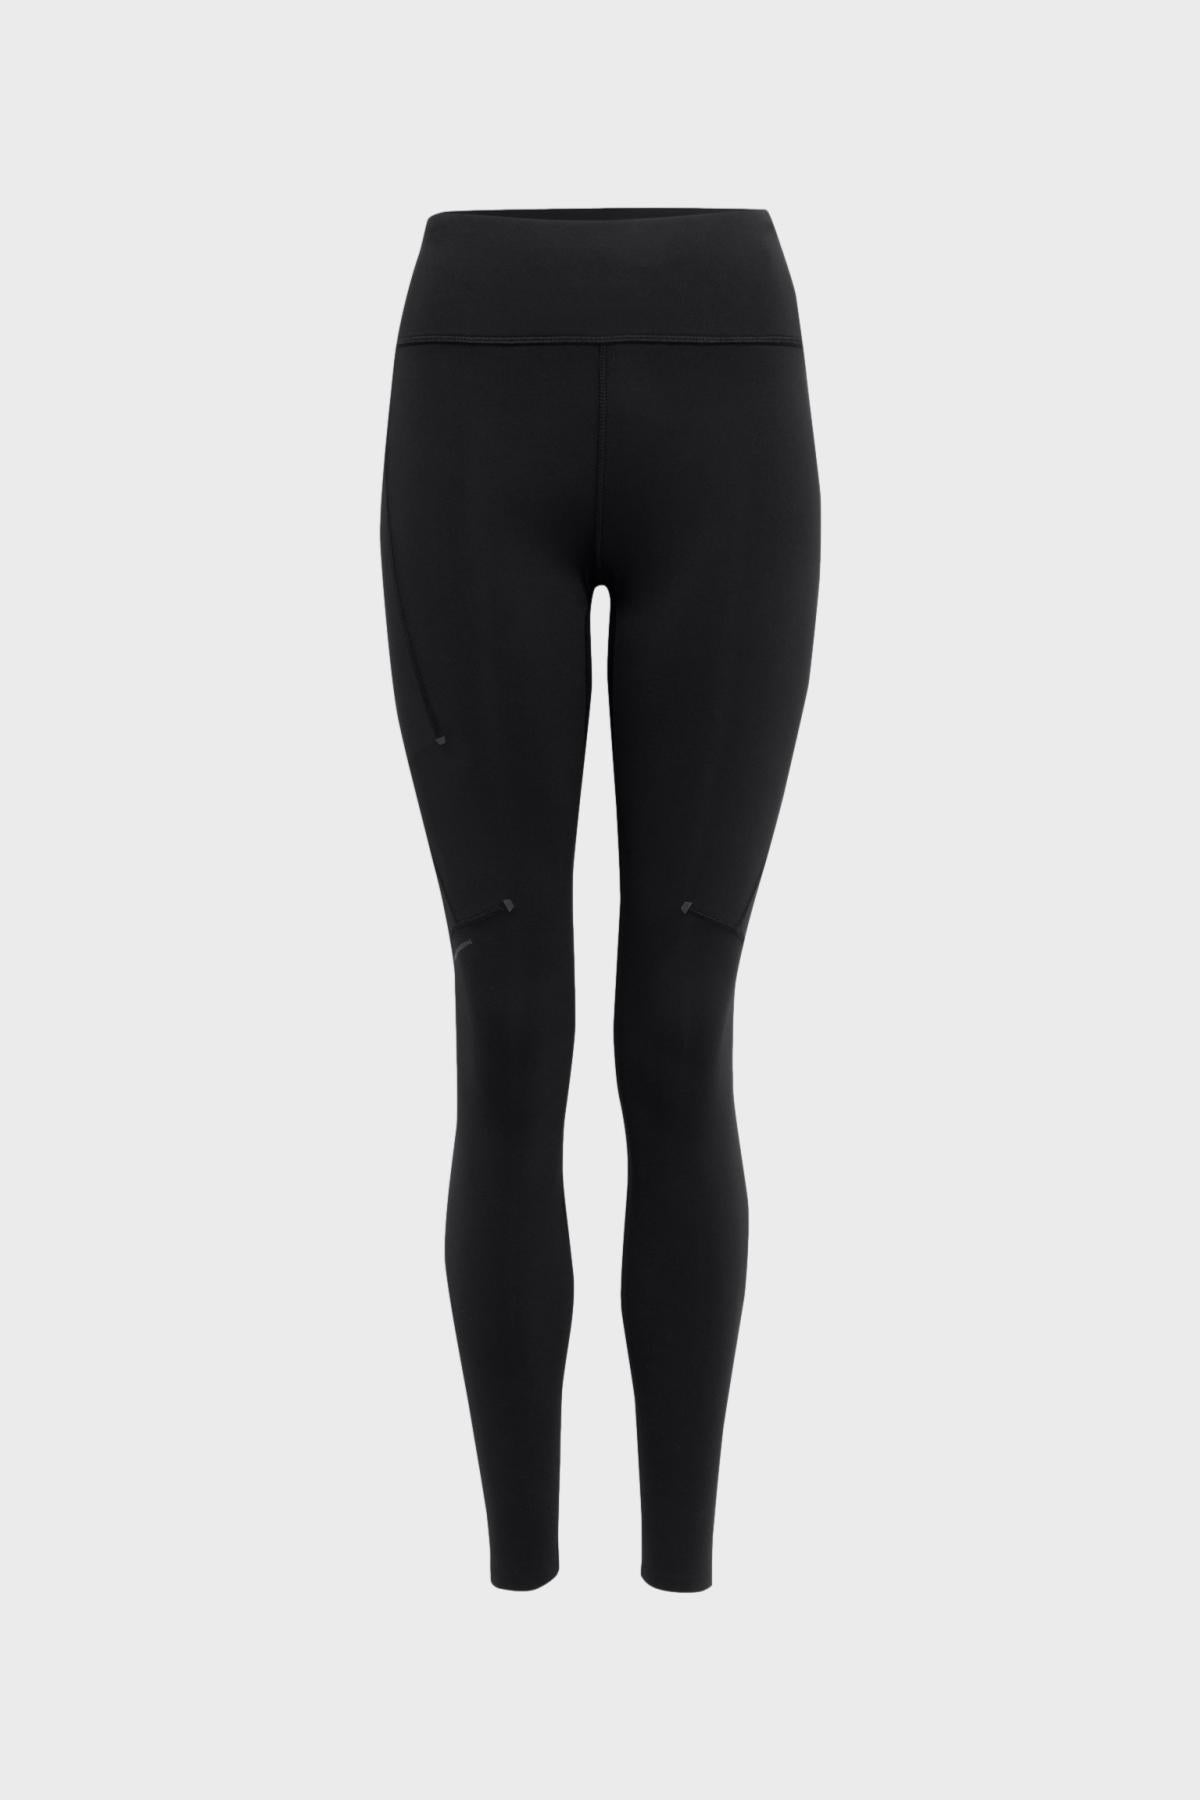 ON W - PERFORMANCE TIGHTS